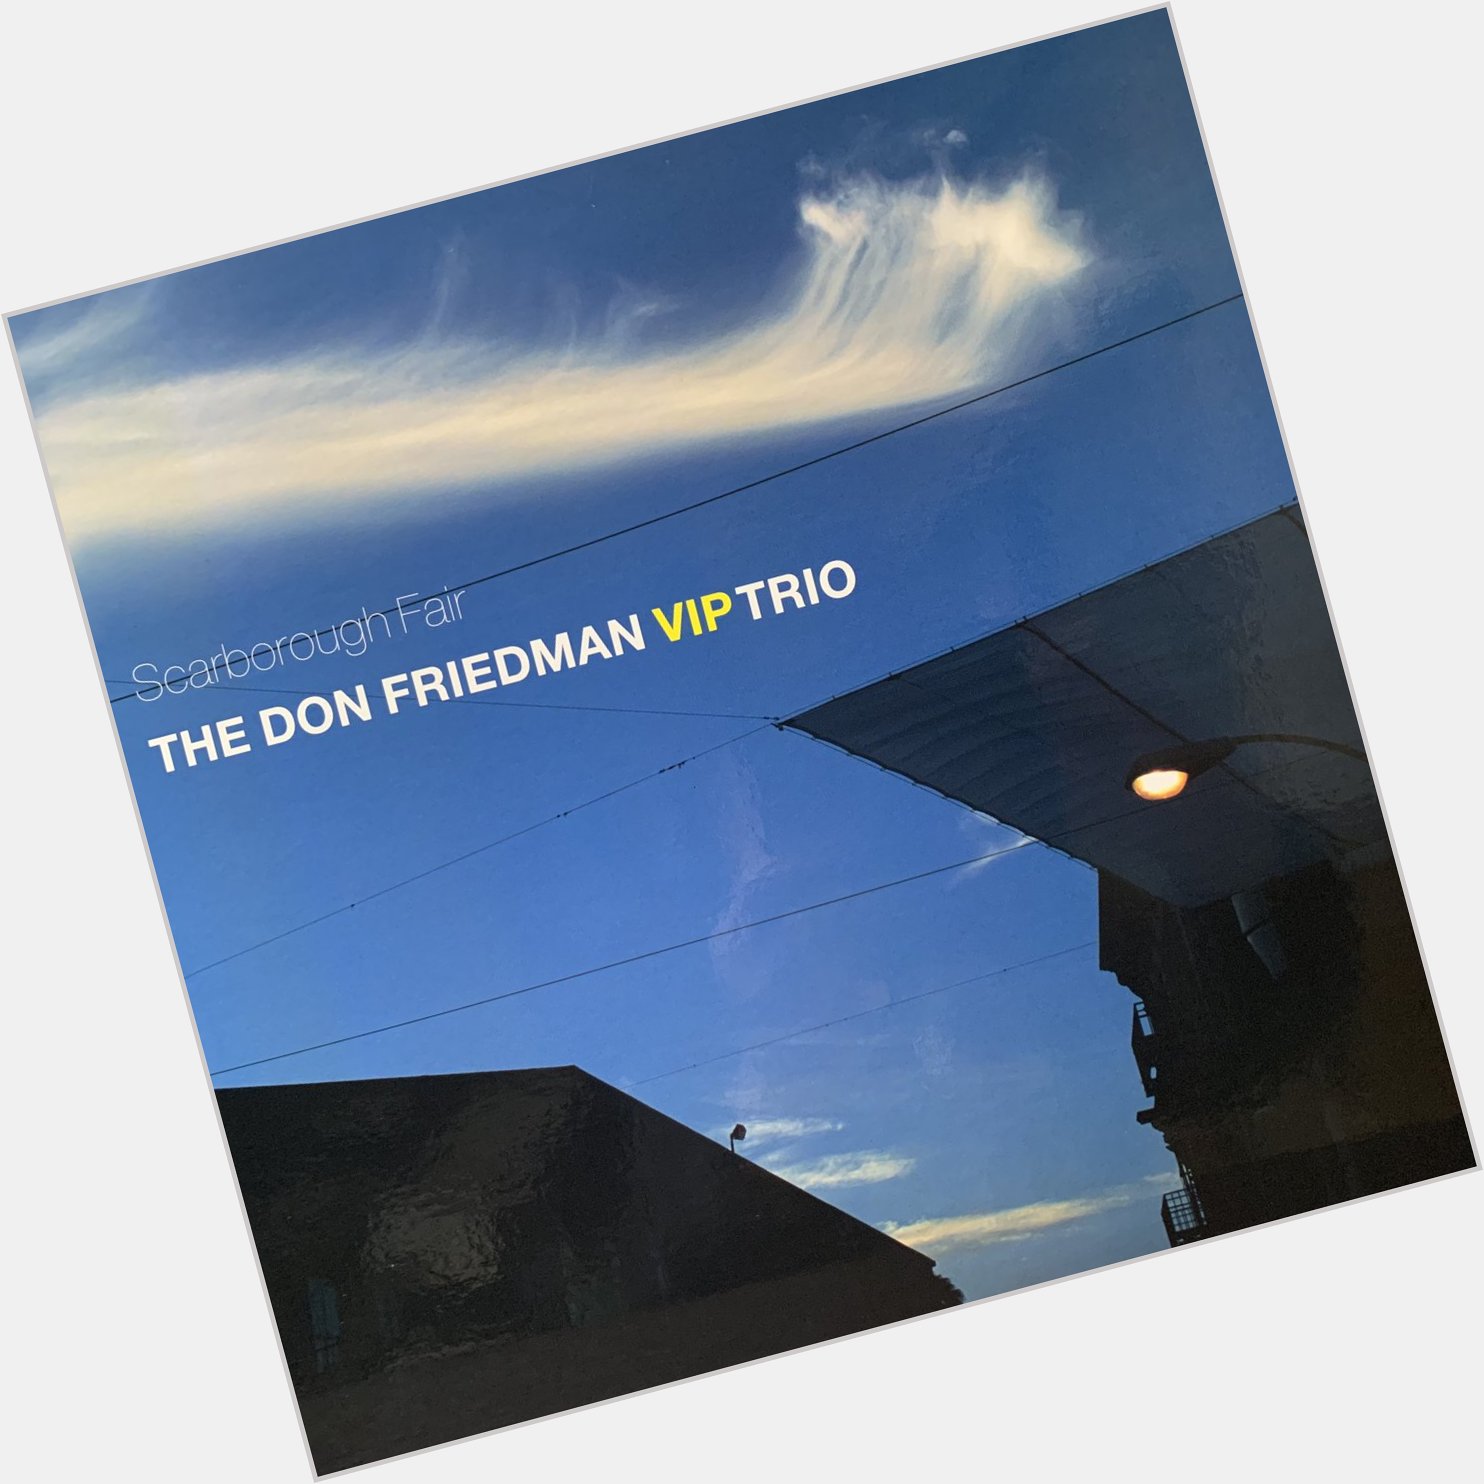  Scarborough Fair / The Don Friedman Vip Trio Recorded March 7, 2005
Happy Birthday  (1935-2016) 